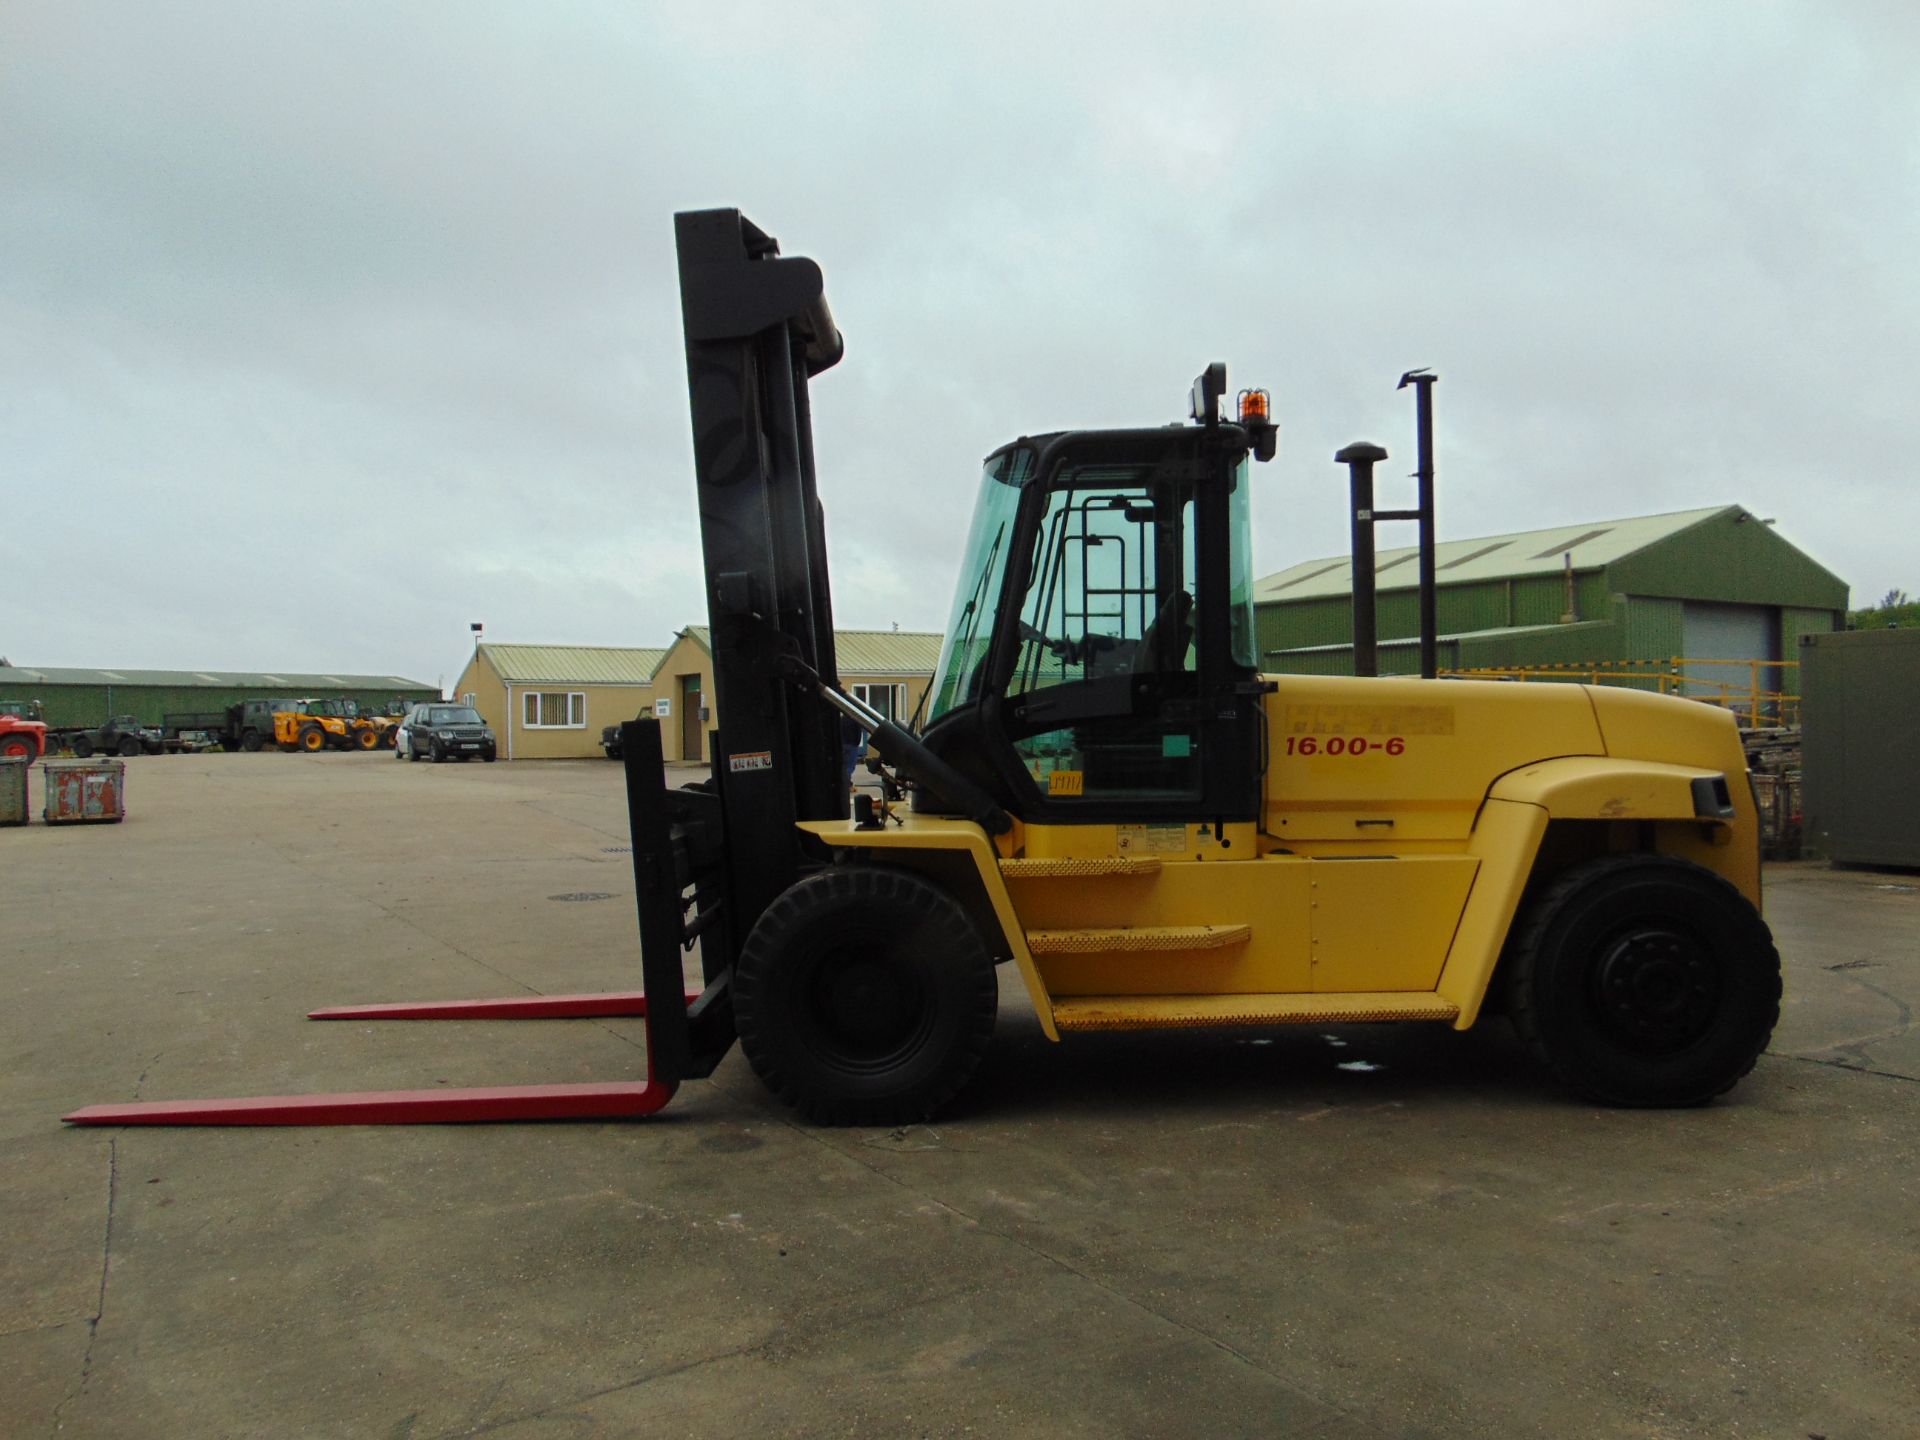 Ex Reserve Hyster H16.00 XM High capacity 16 Tonne Forklift ONLY 1,784 Hours! - Image 5 of 33